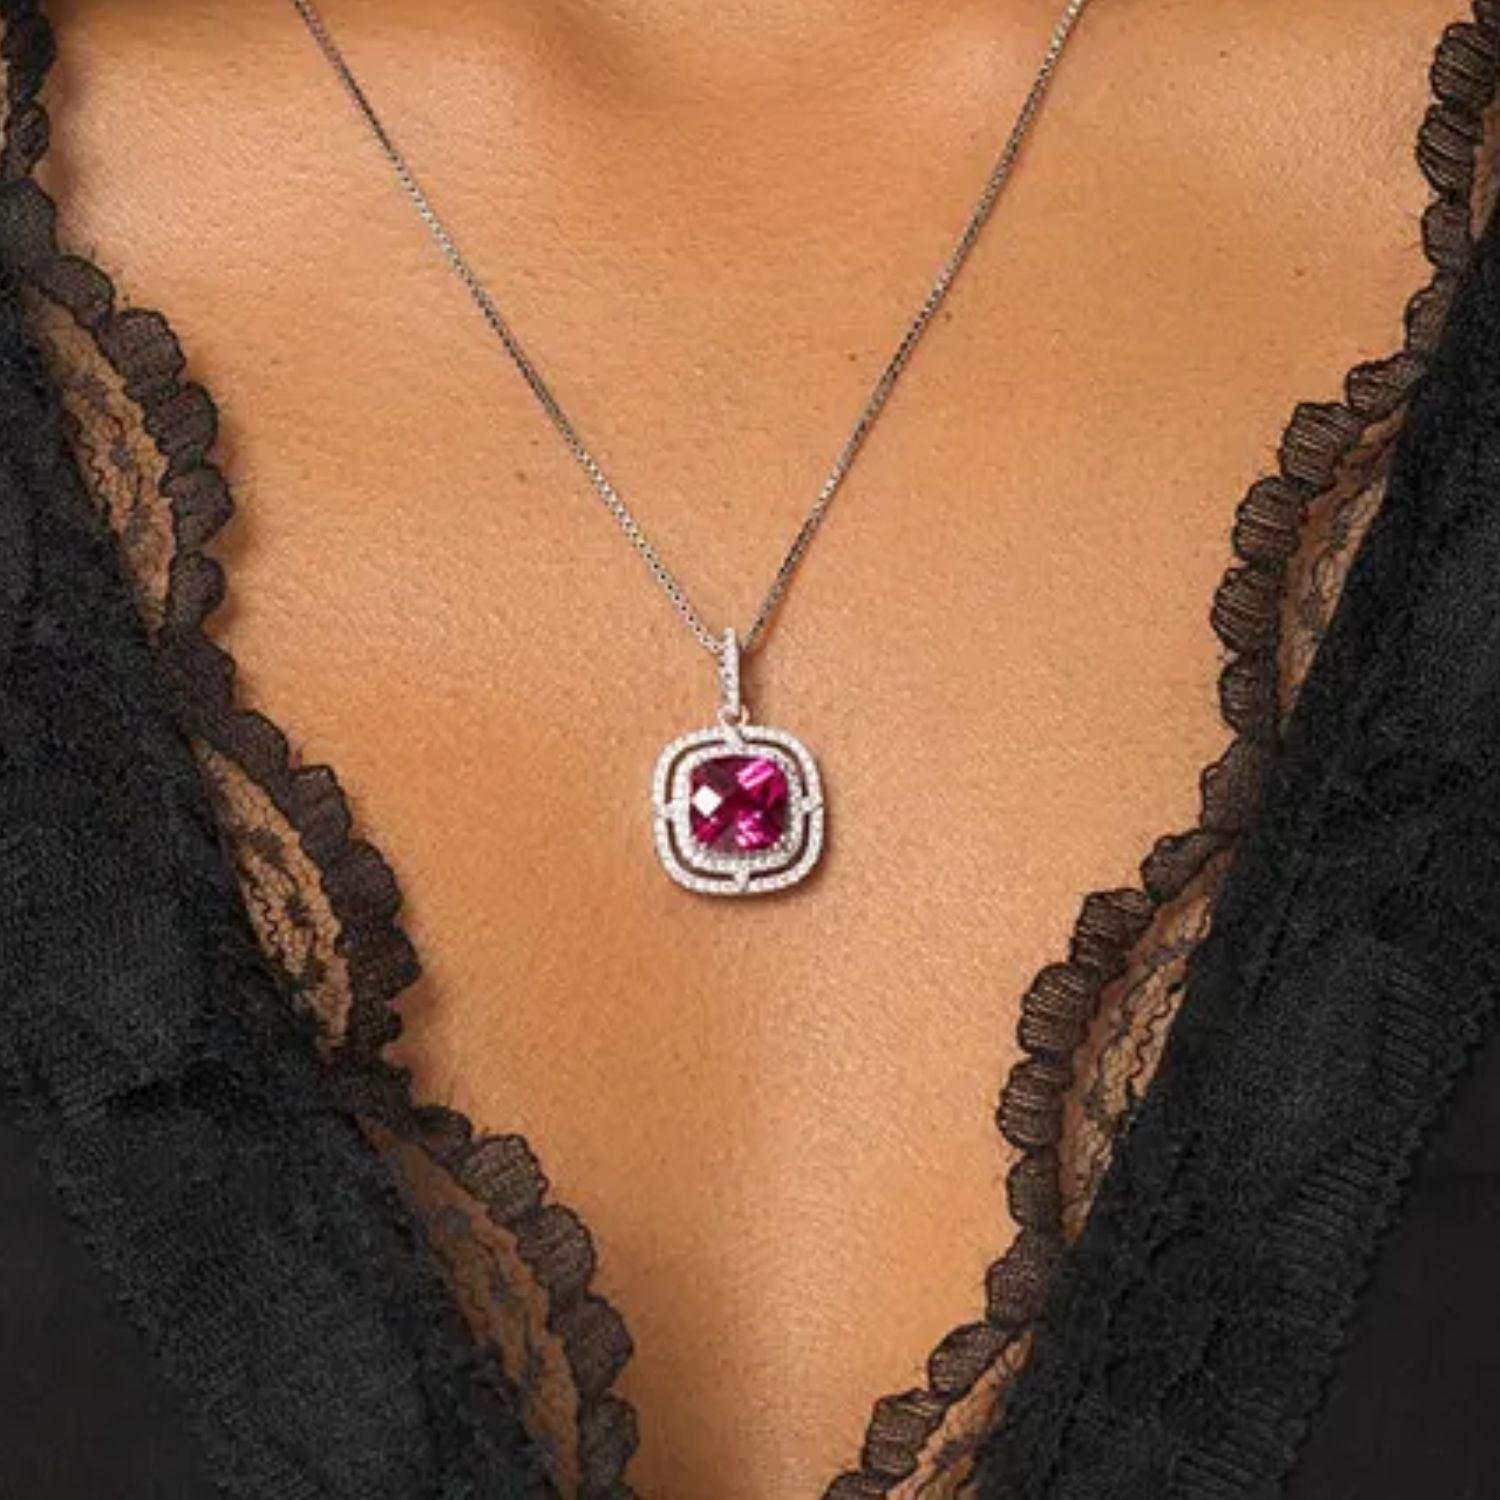 Ruby Cushion Cut Artistic Pendant Necklace in Sterling Silver